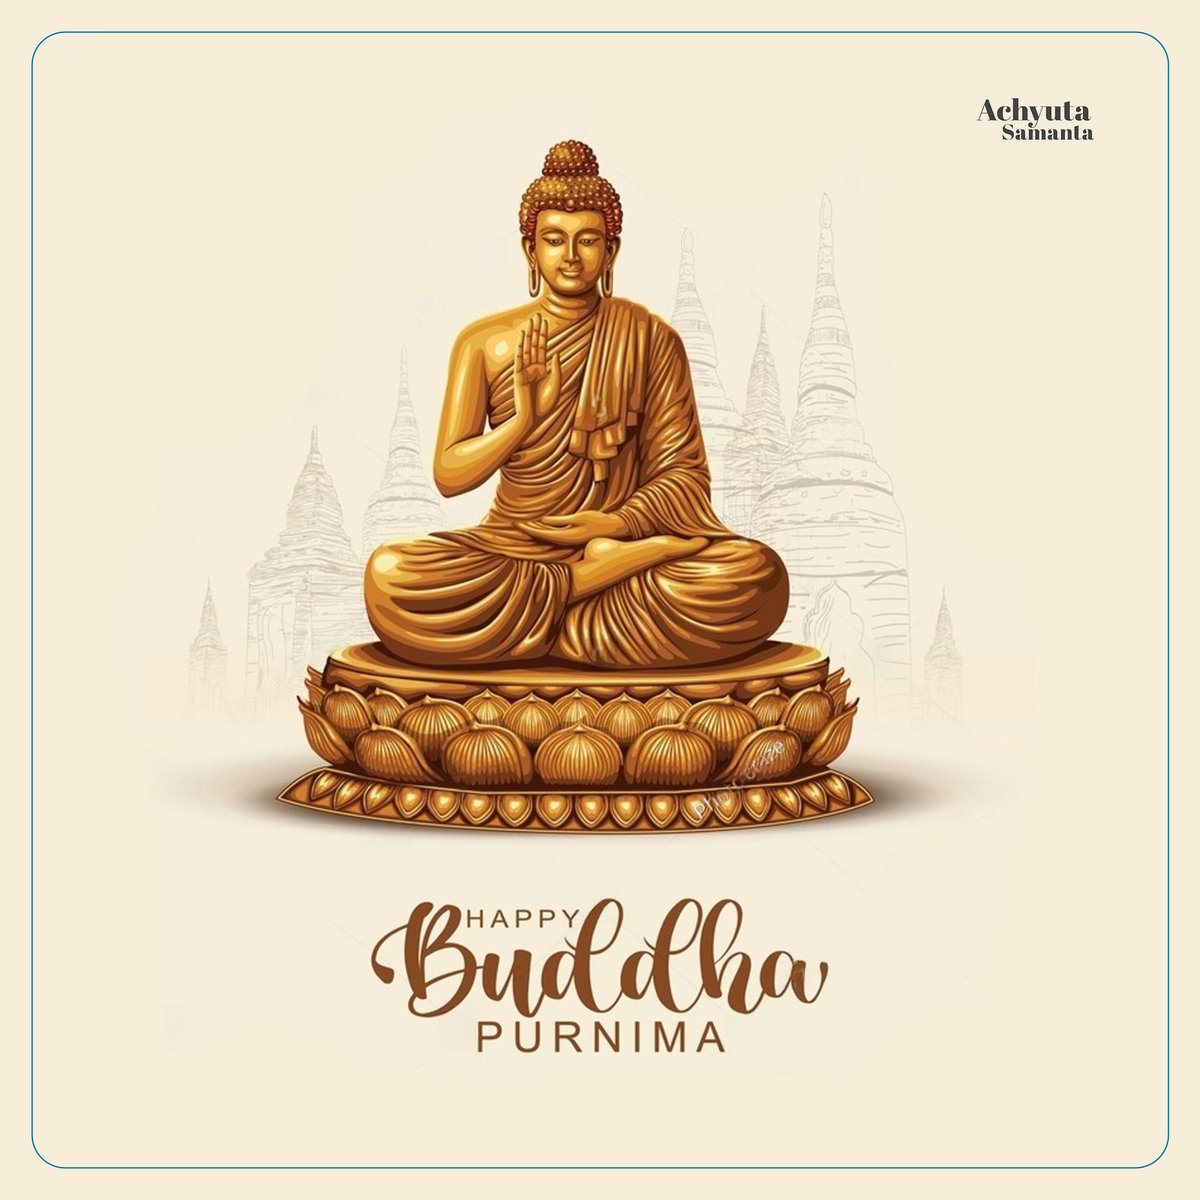 On this auspicious day of Buddha Purnima, may the teachings of Lord Buddha guide us towards peace, compassion, and wisdom. Let us embrace his path of kindness and enlightenment, and strive to make the world a better place. Wishing everyone a blessed and peaceful Buddha Purnima!